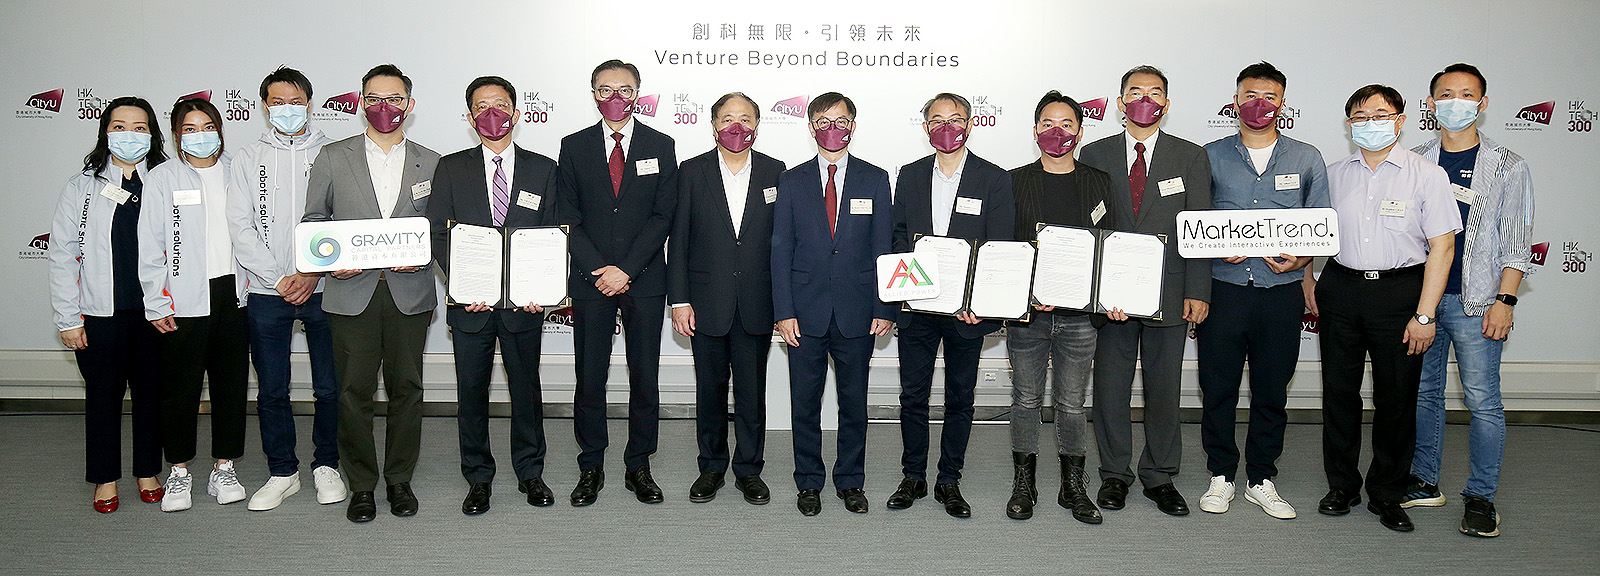 (From the fourth left) Ir Dr Alan Lam Hiu-fung, Director & CTO, and Mr Eric Yip Chi-chiu, Founder and Managing Director, both from Gravity Capital; Mr Sunny Lee Wai-kwong, CityU Vice-President (Administration) and Managing Director of CityU Enterprises Limited, Dr Raymond Leung Siu-hong, CityU Council Member and Board Chairman of CityU Enterprises Limited; Dr David Chung Wai-keung, Under Secretary for Innovation and Technology of the HKSAR Government; Mr Stanley Lau Tze-cheung, one of the founders of Allied Power; Mr German Cheung Wai-man, Solution Director of Market Trend; Professor Michael Yang Mengsu, CityU Vice-President (Research and Technology) and Executive Committee Chairman of HK Tech 300, and Mr Albert Lui Chung-yee, Executive Director of Market Trend and other guests.